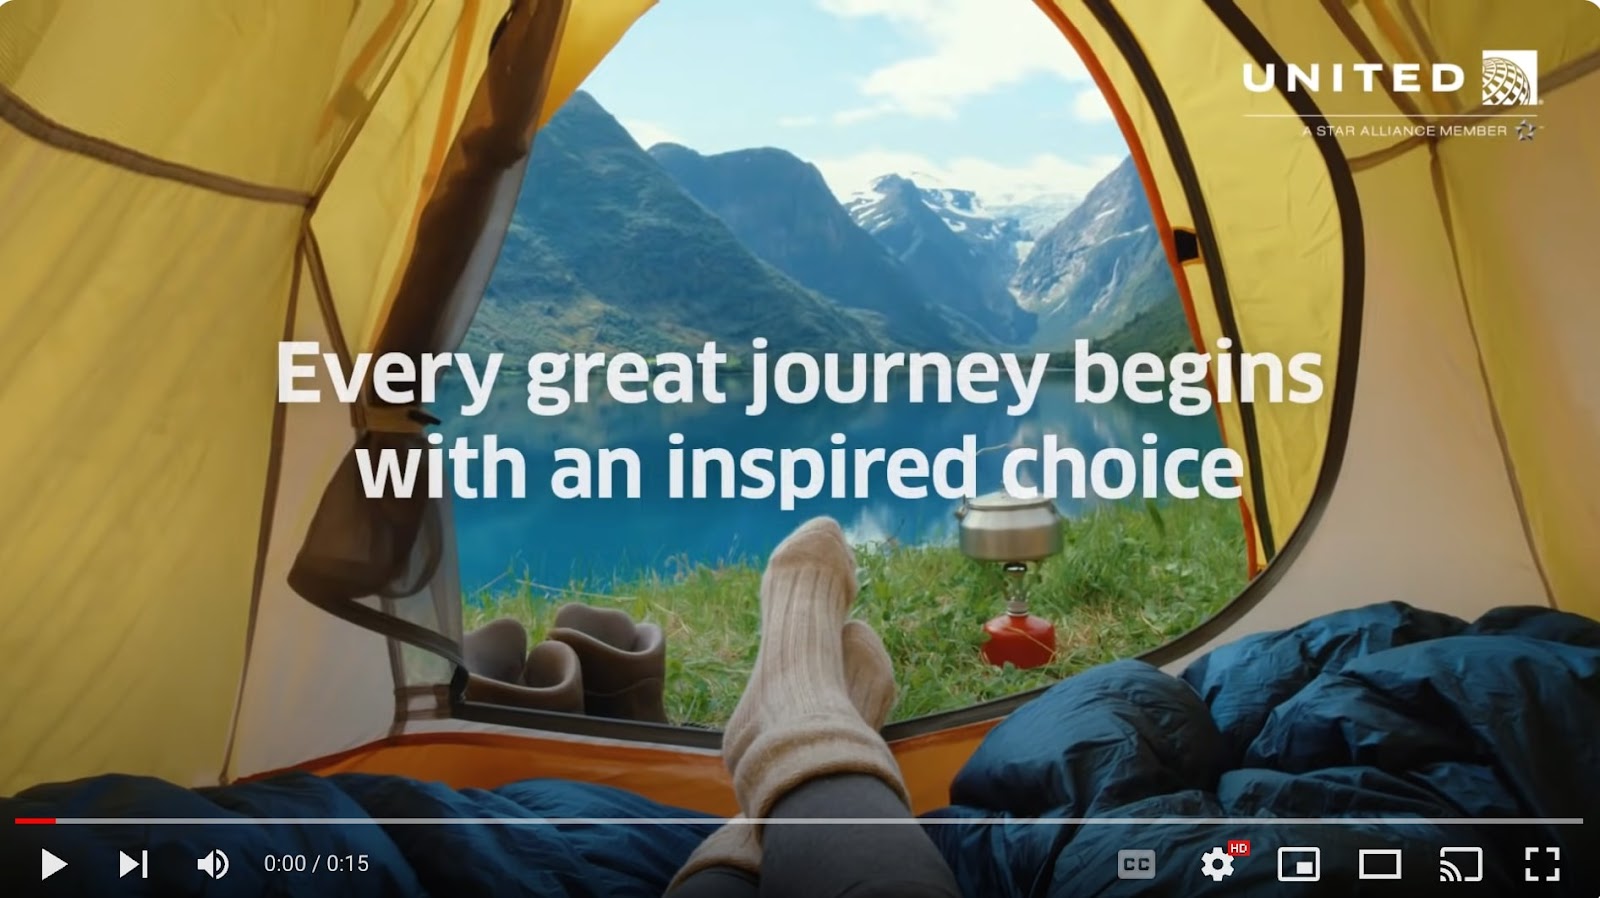 United Airlines’ video intro with "Every great journey begins with an inspired choice" message